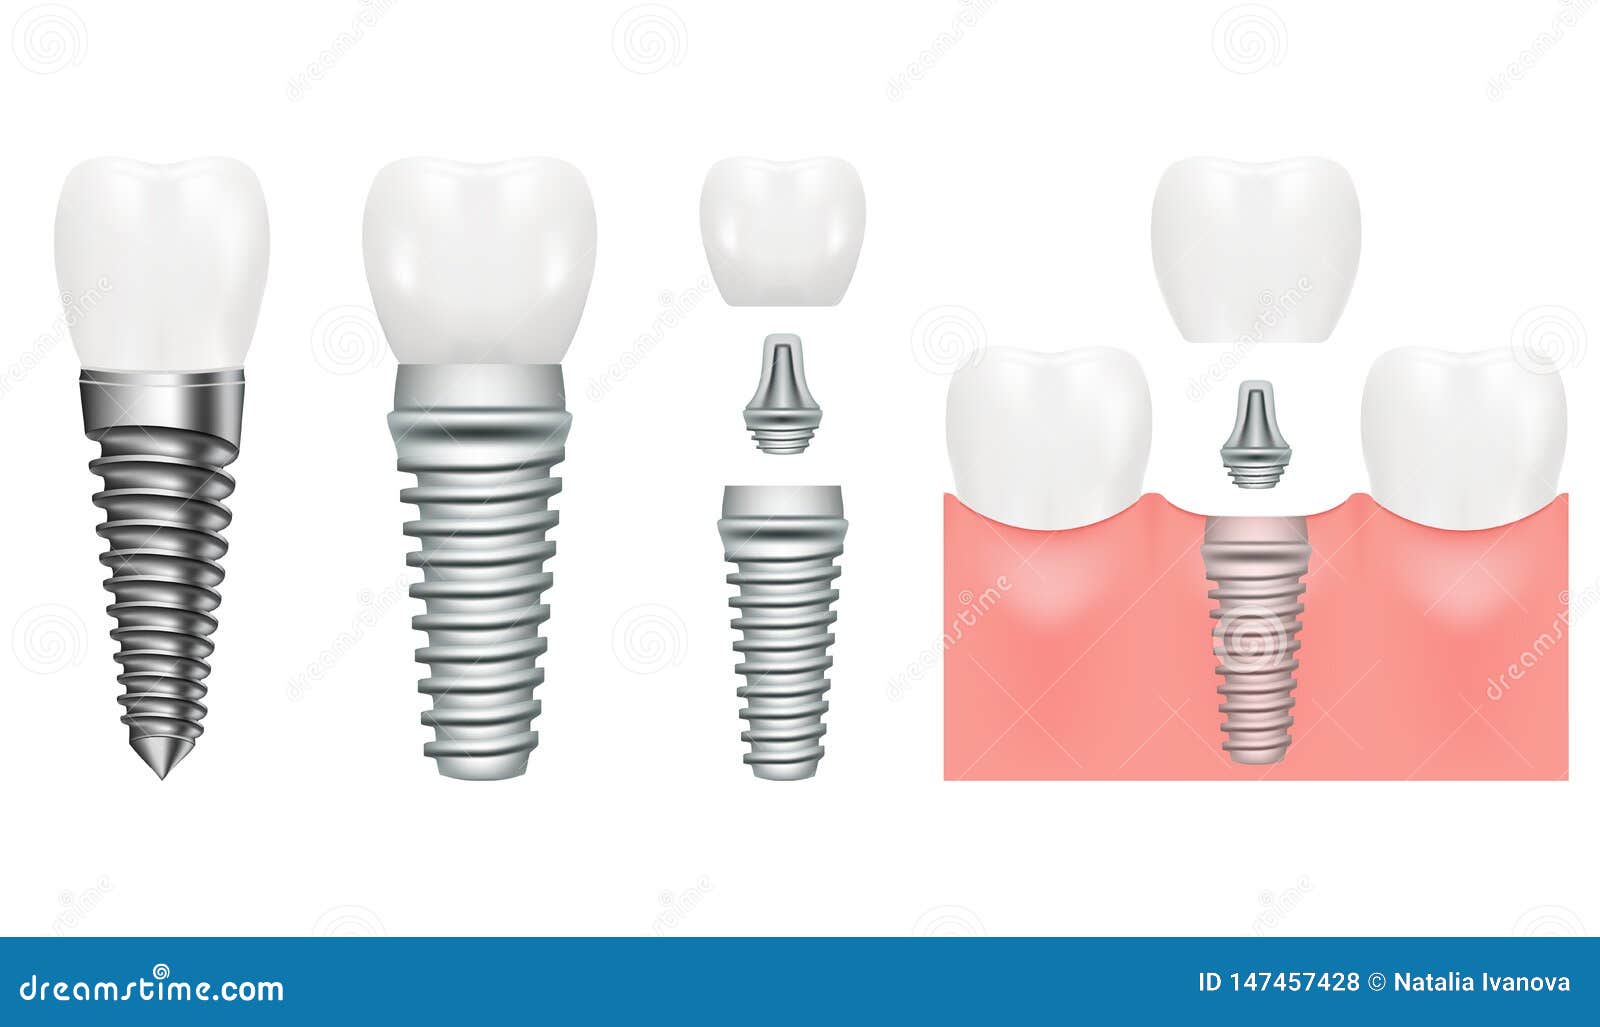 realistic dental implant structure with all parts crown, abutment, screw. dentistry. implantation of human teeth. 